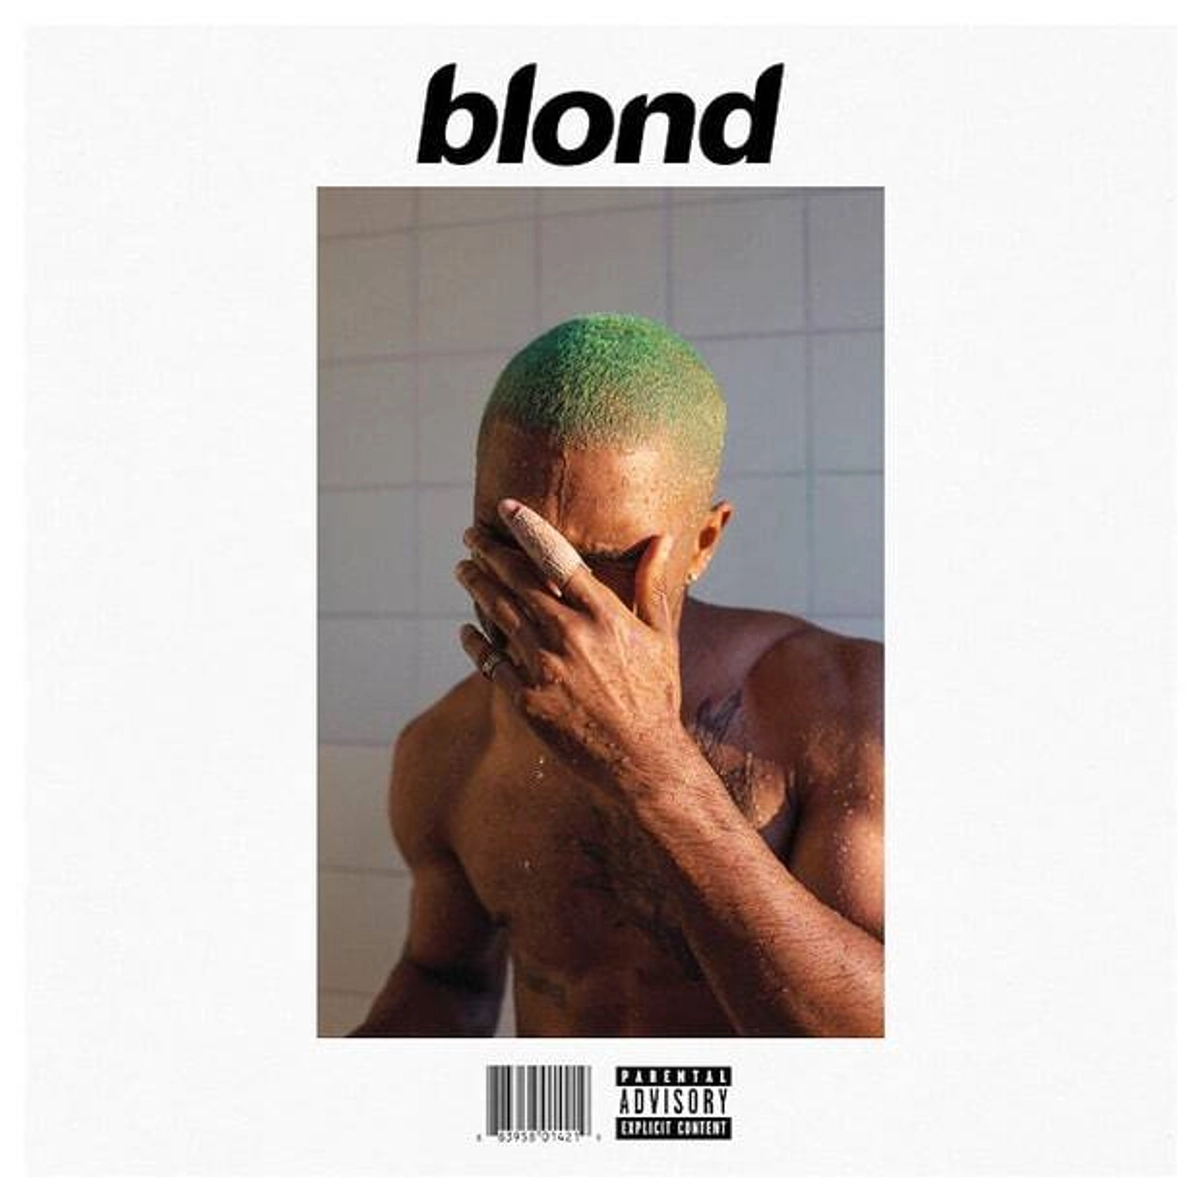 In Frank Oceans song White Ferrari describes his emotional journey as he is getting over the loss of his brother (Photo released by Three Six Zero Entertainment).